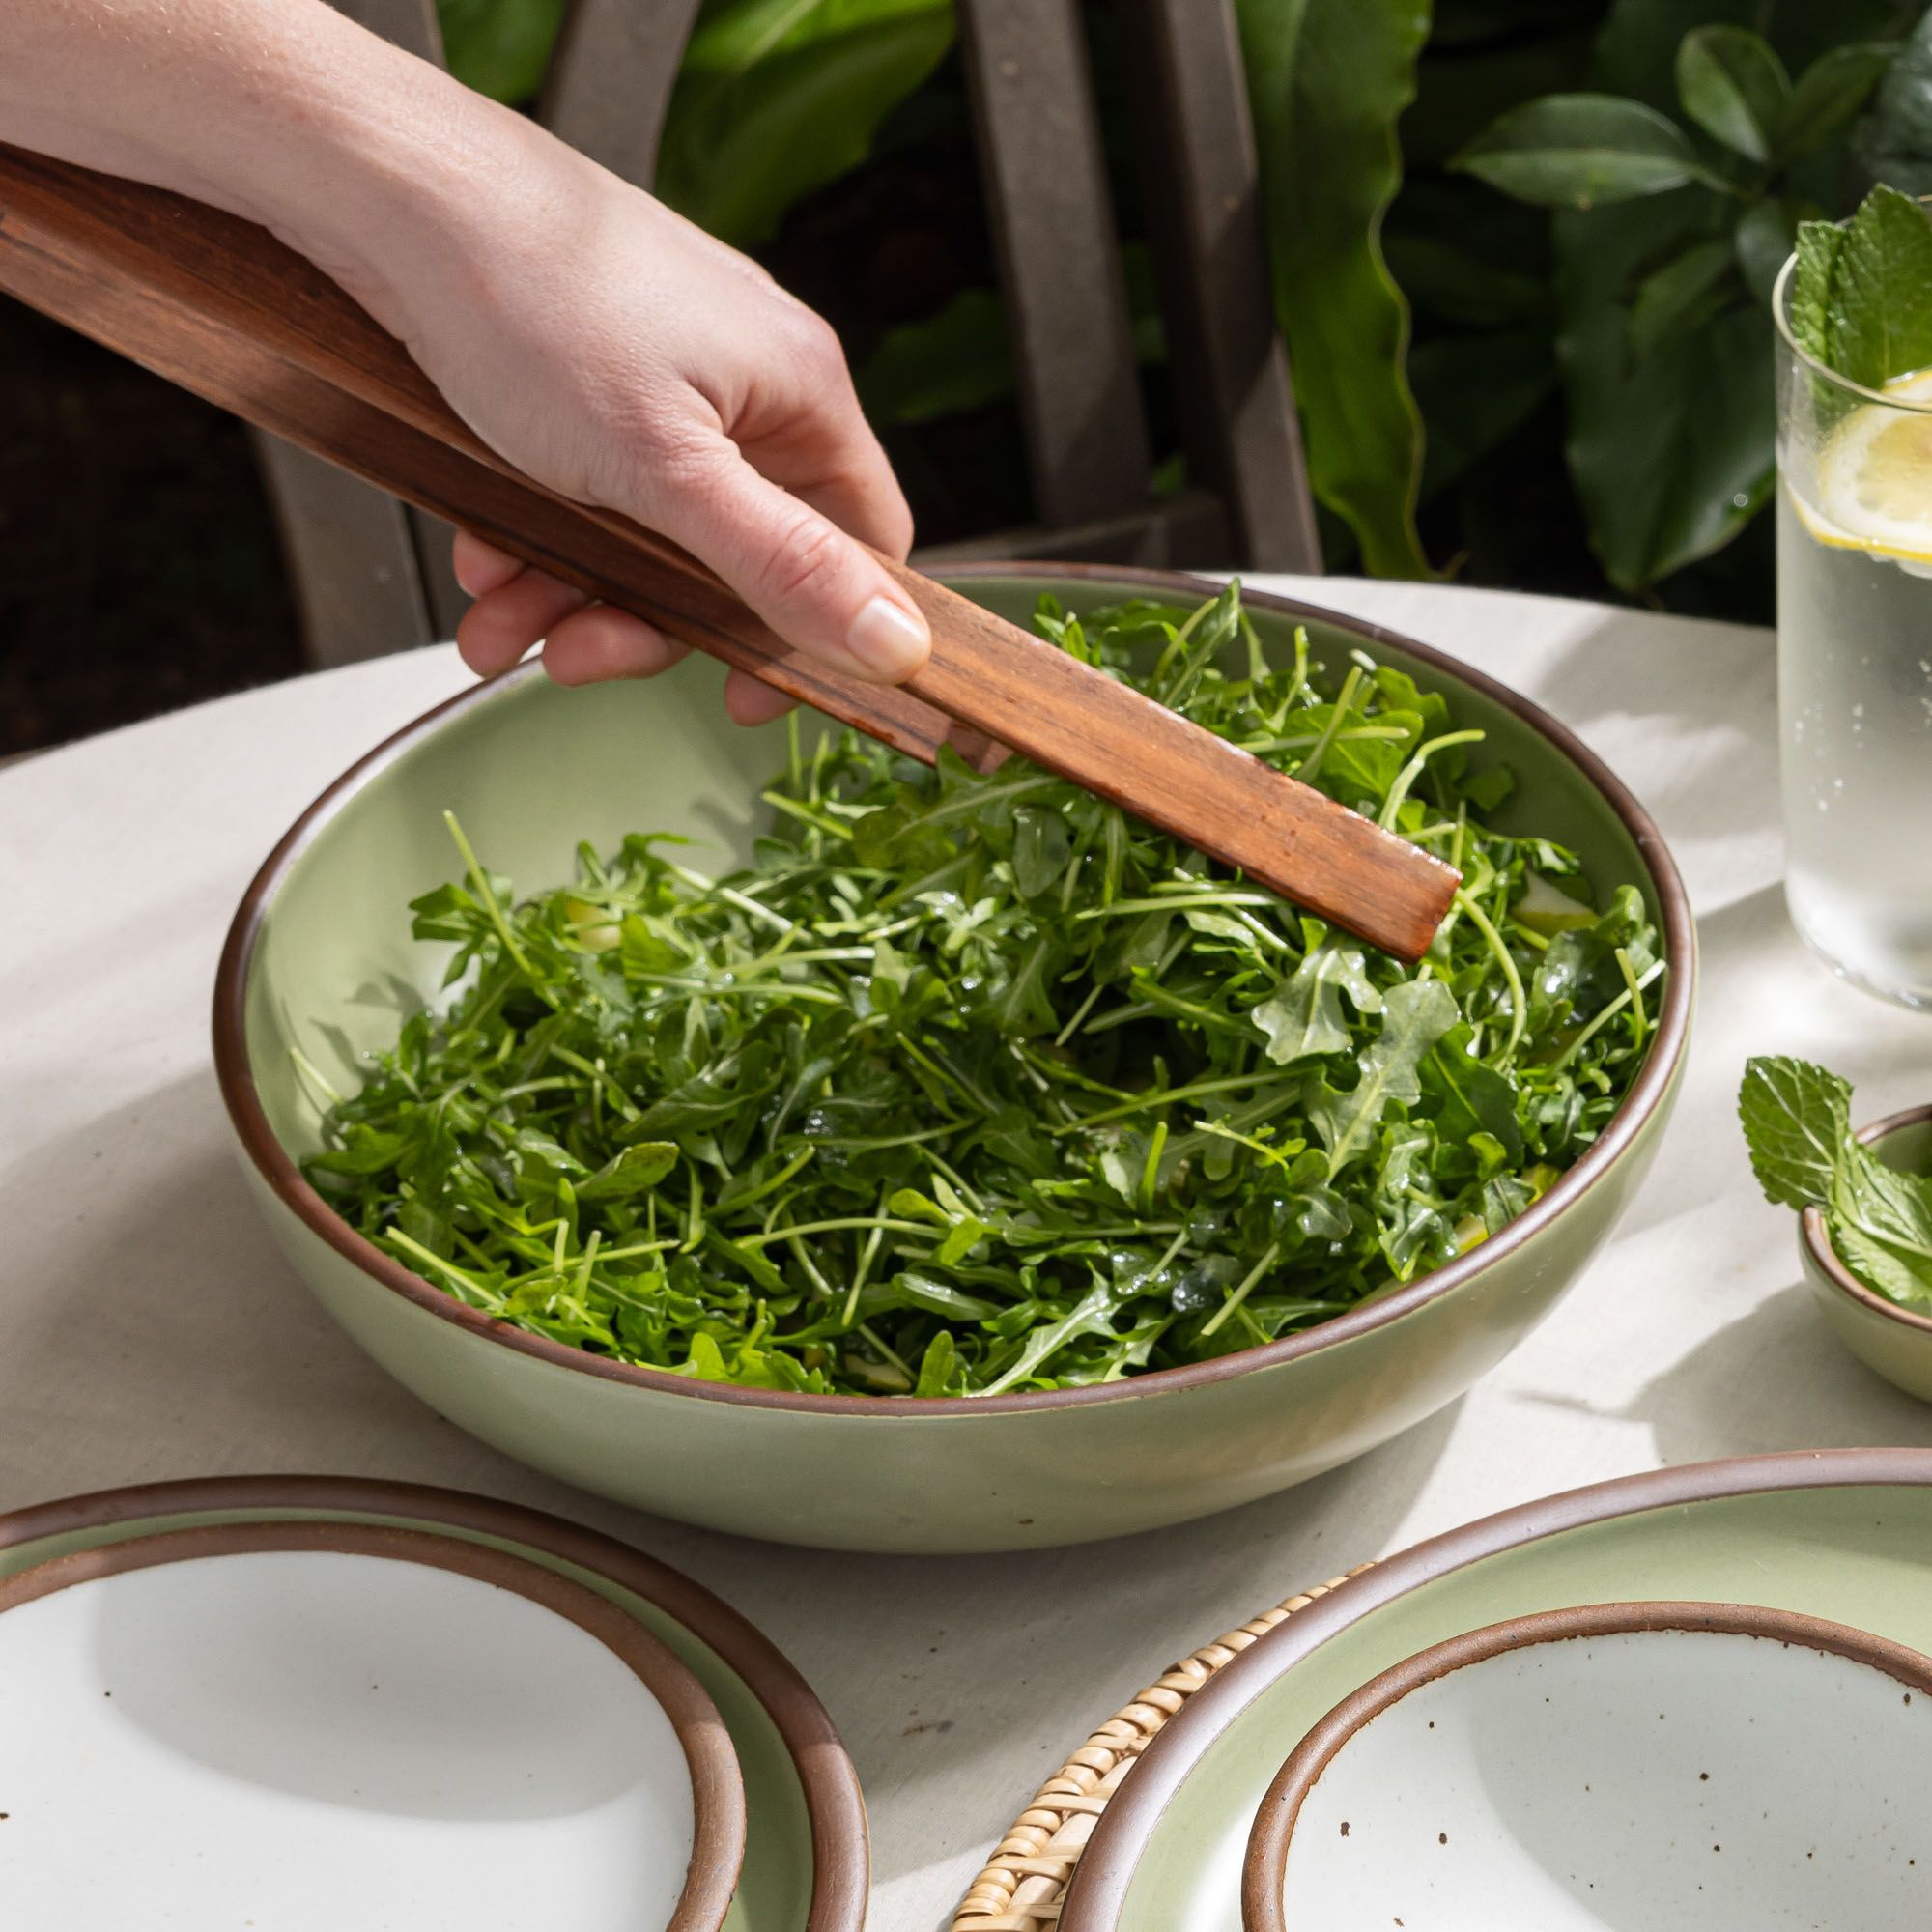 A salad sits in a large shallow serving ceramic bowl in a calming sage green color with a hand holding serving tongs.